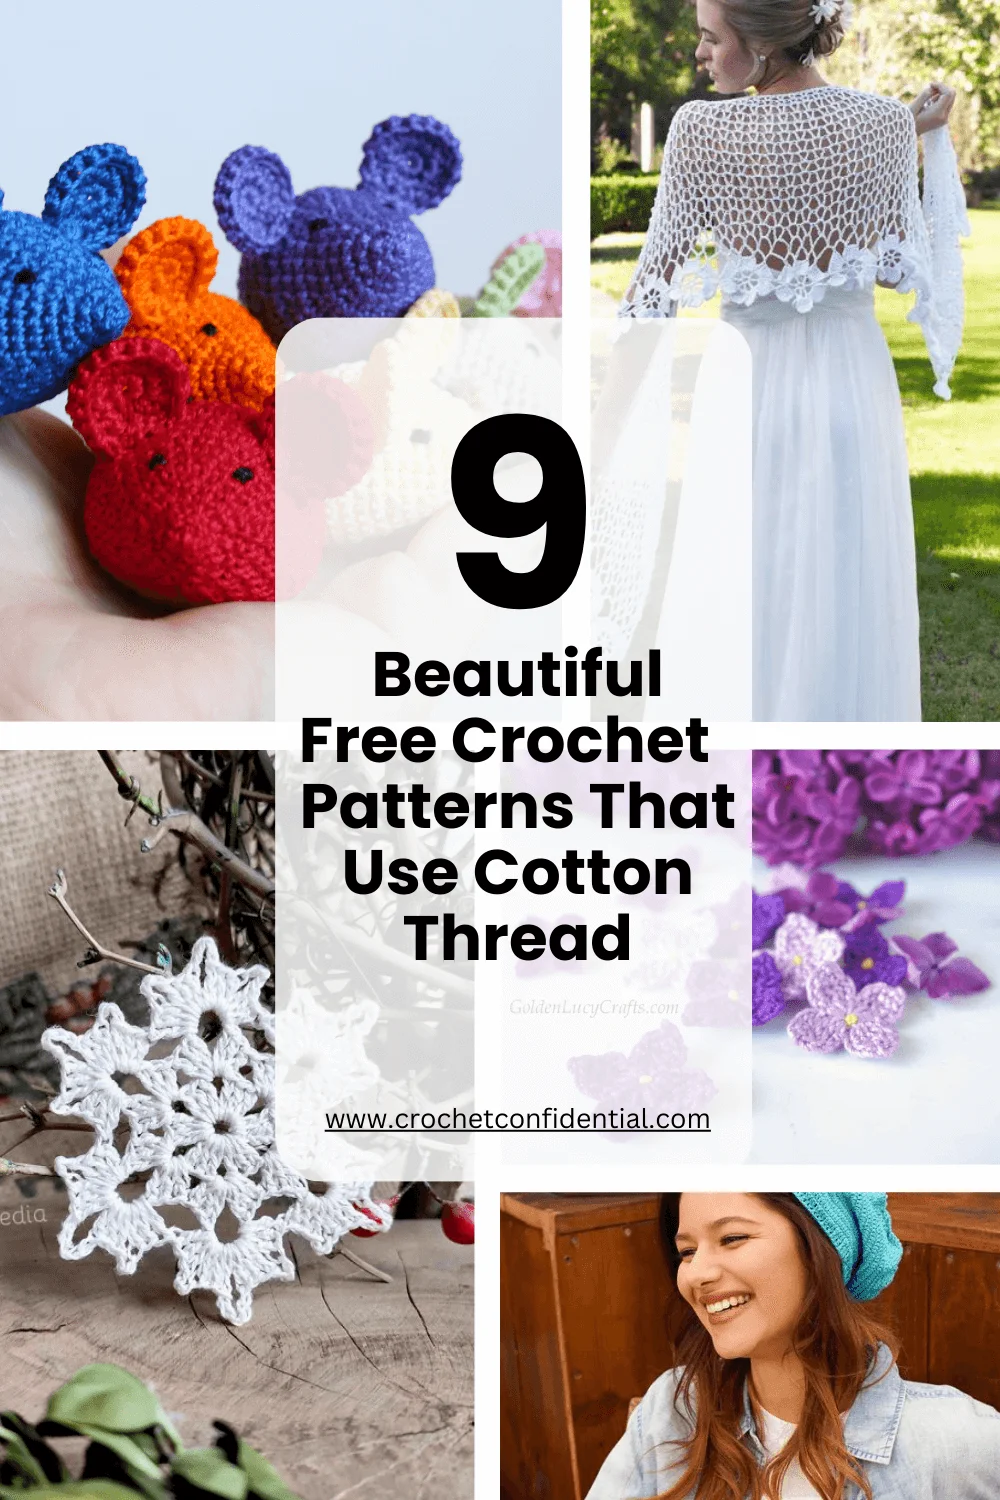 Lighting Project Ideas and Free Crochet Patterns - Your Crochet